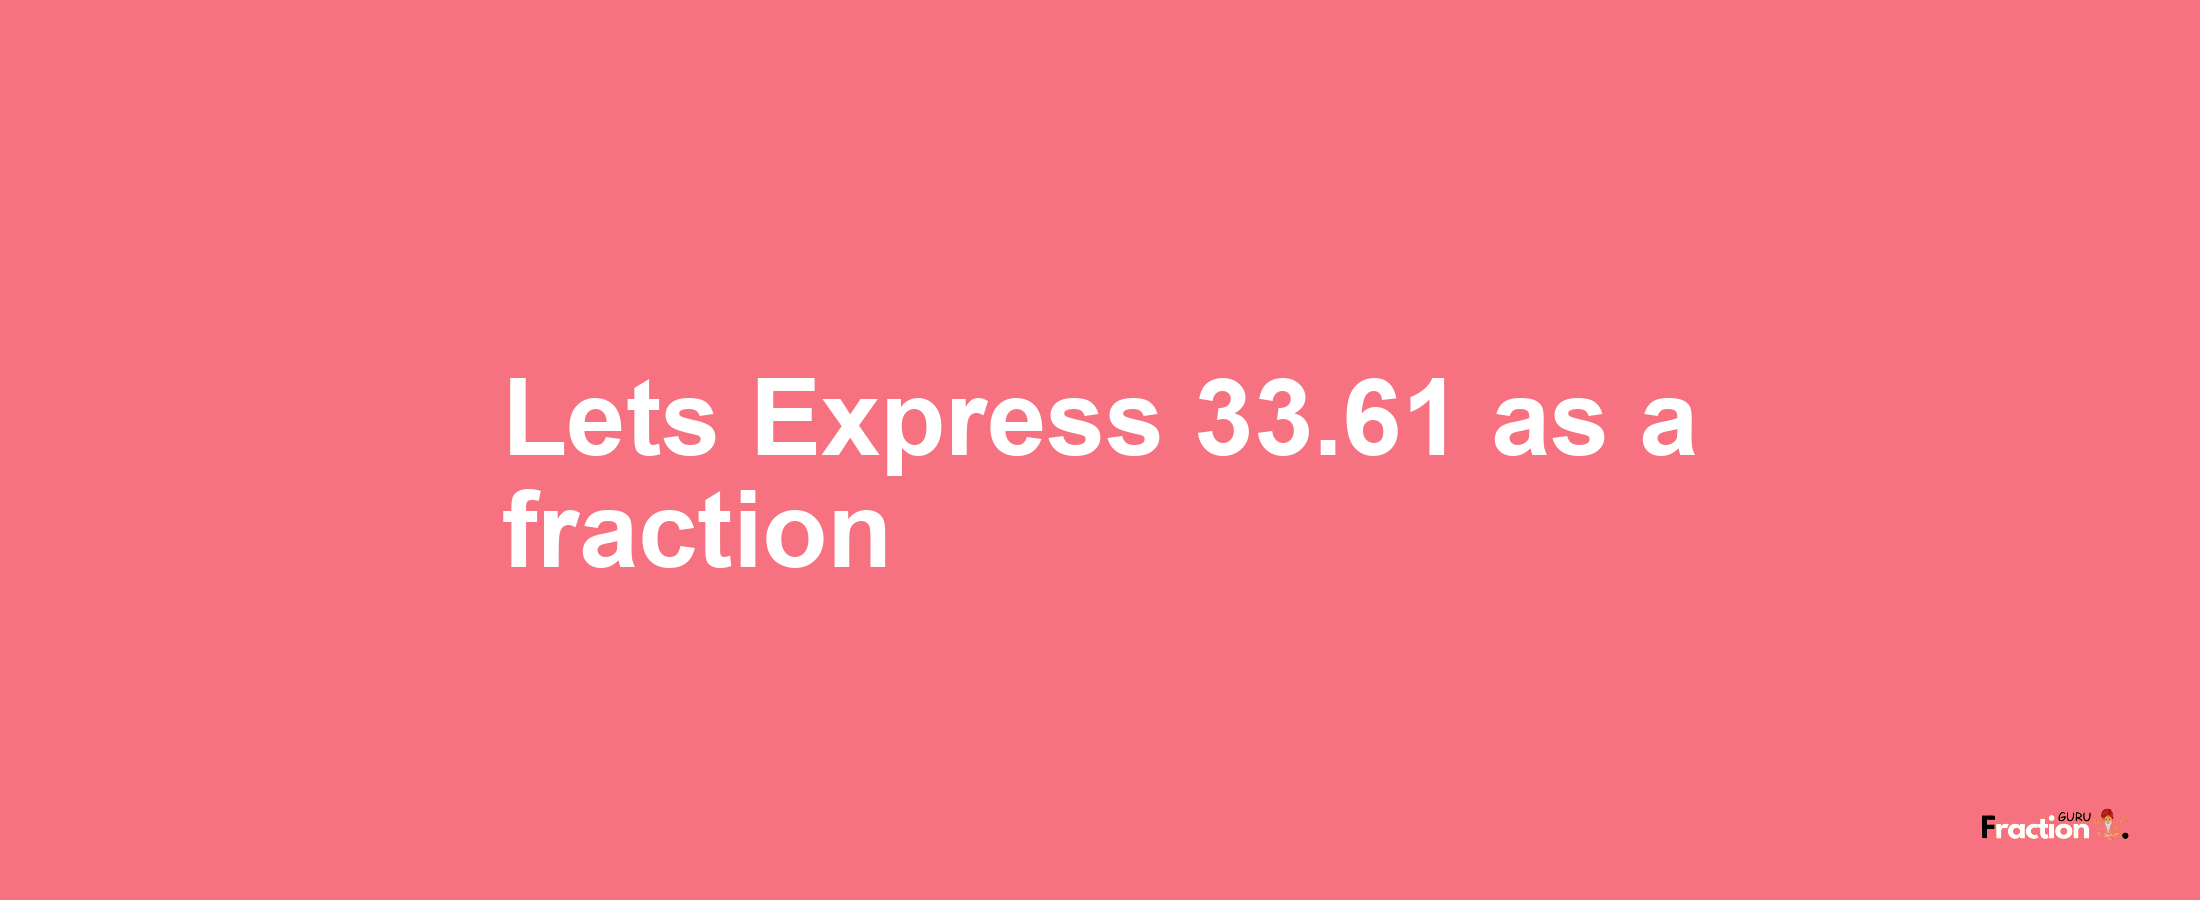 Lets Express 33.61 as afraction